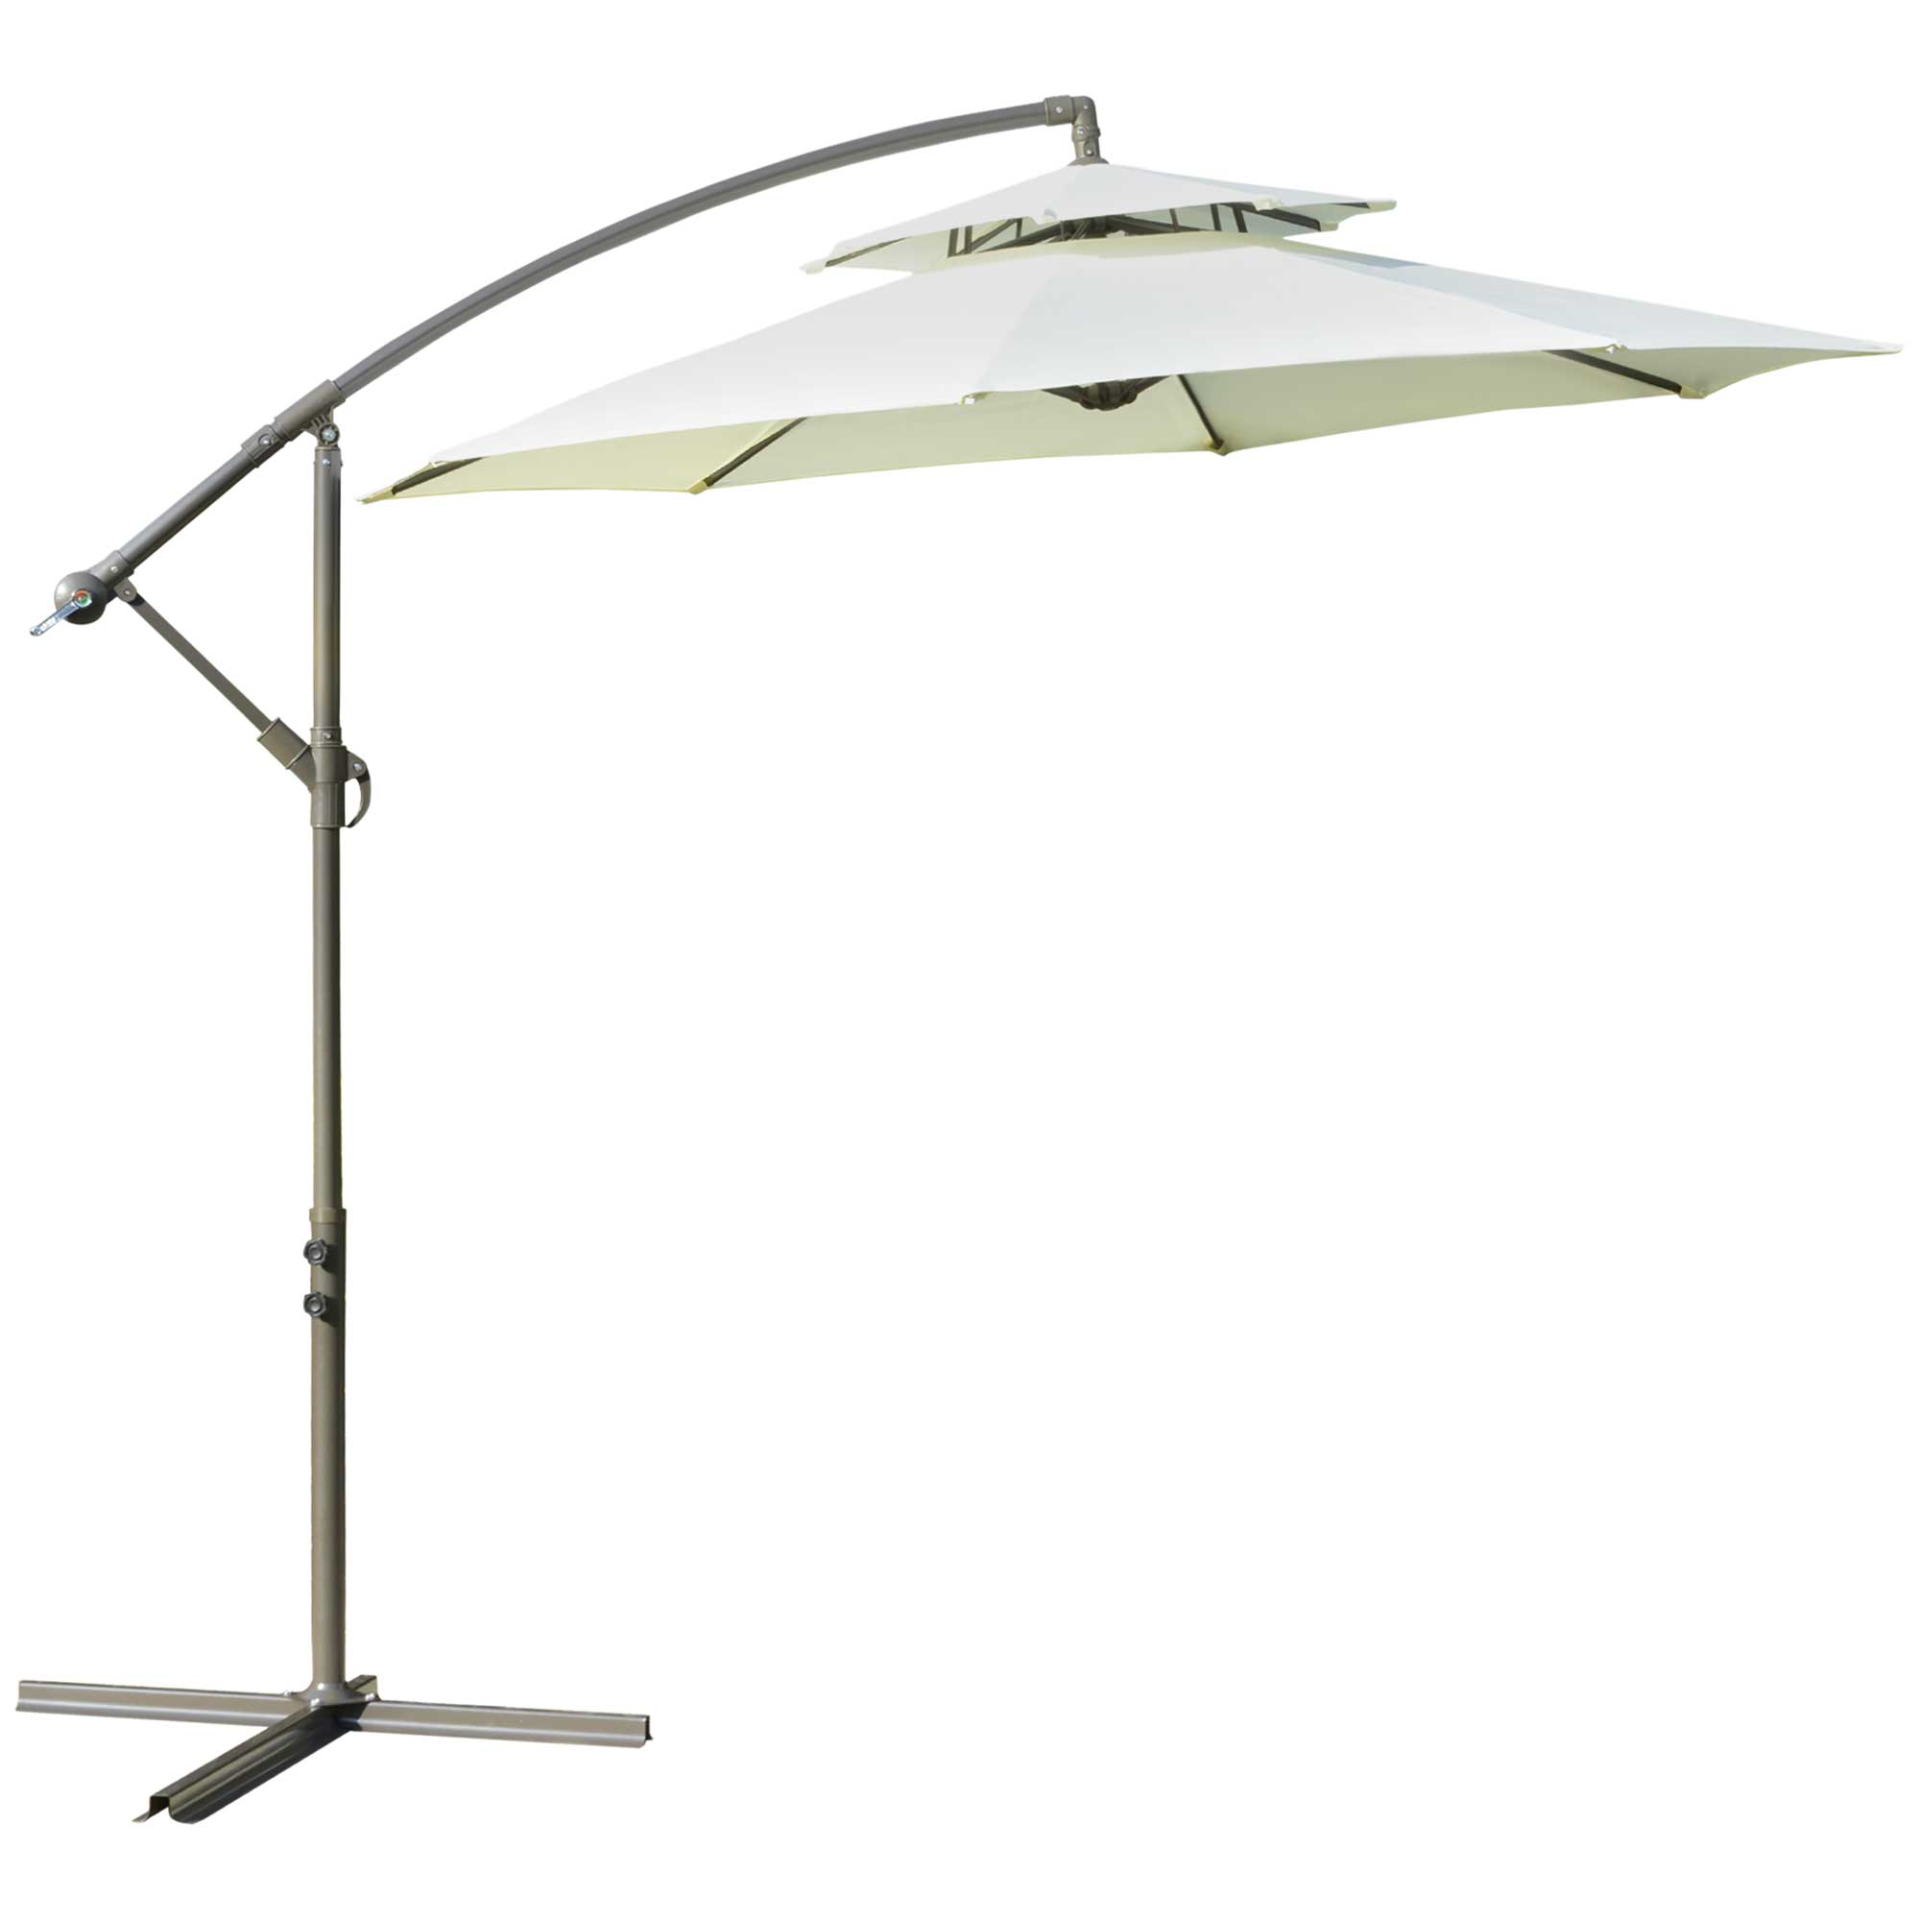 Outsunny 2.7m Garden Banana Parasol Cantilever Umbrella with Crank Handle, Double Tier Canopy and Cross Base for Outdoor, Hanging Sun Shade, Beige